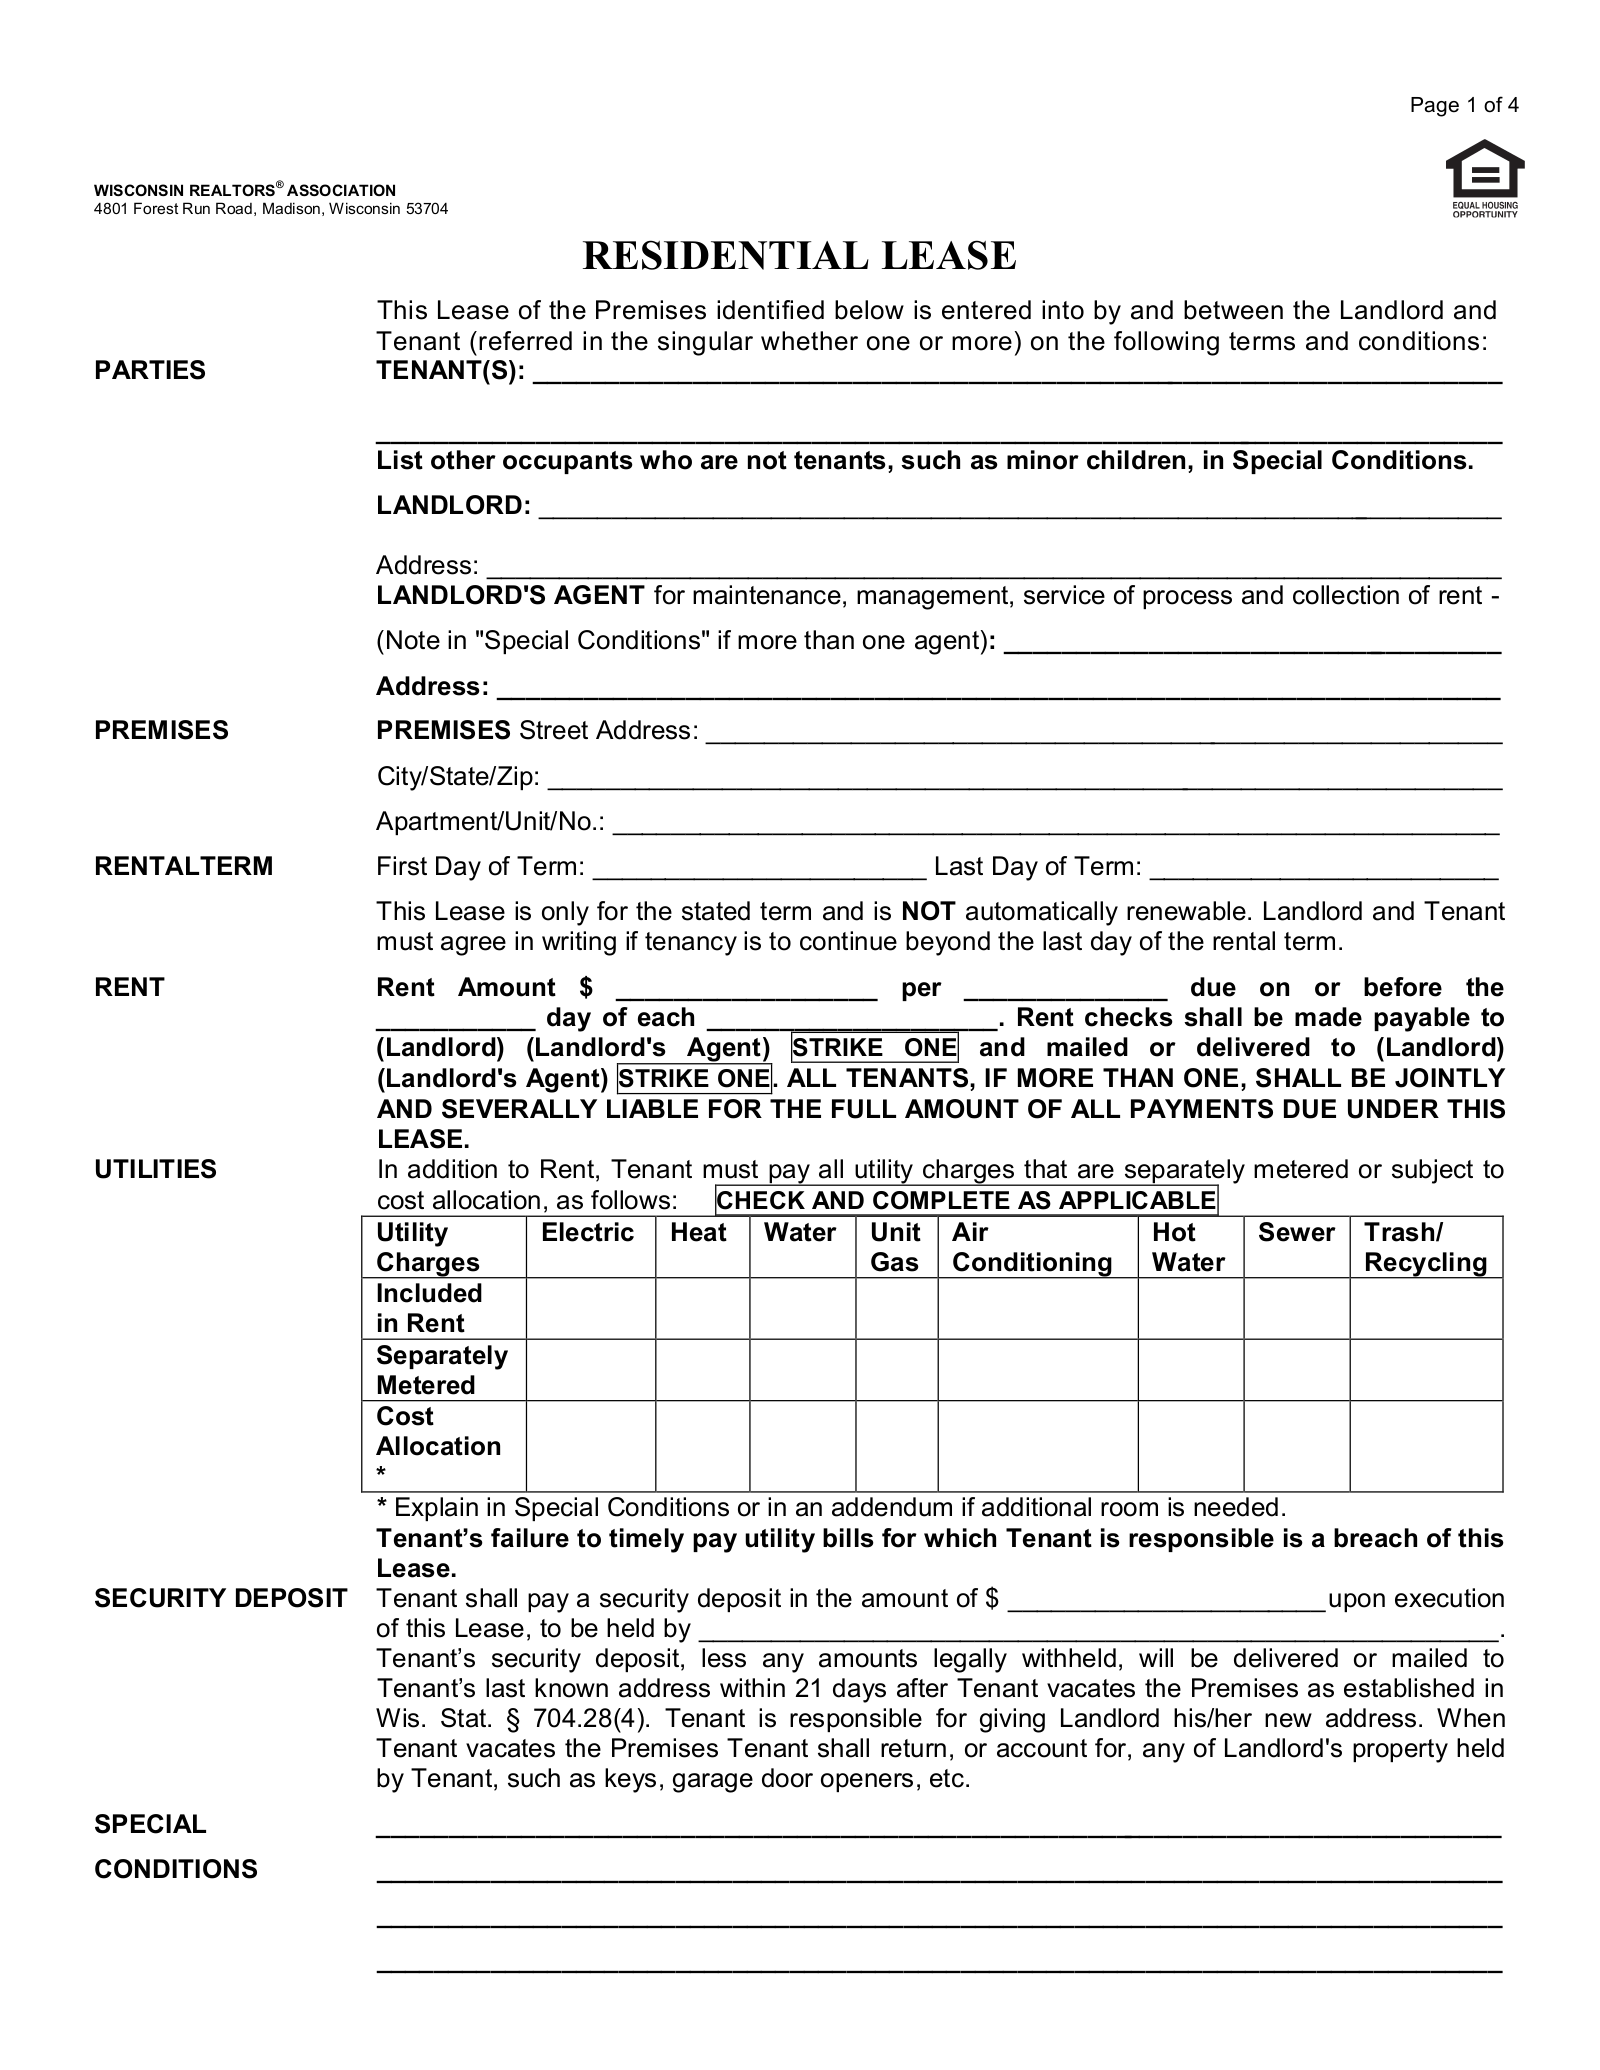 Wisconsin Association of Realtors Residential Lease Agreement